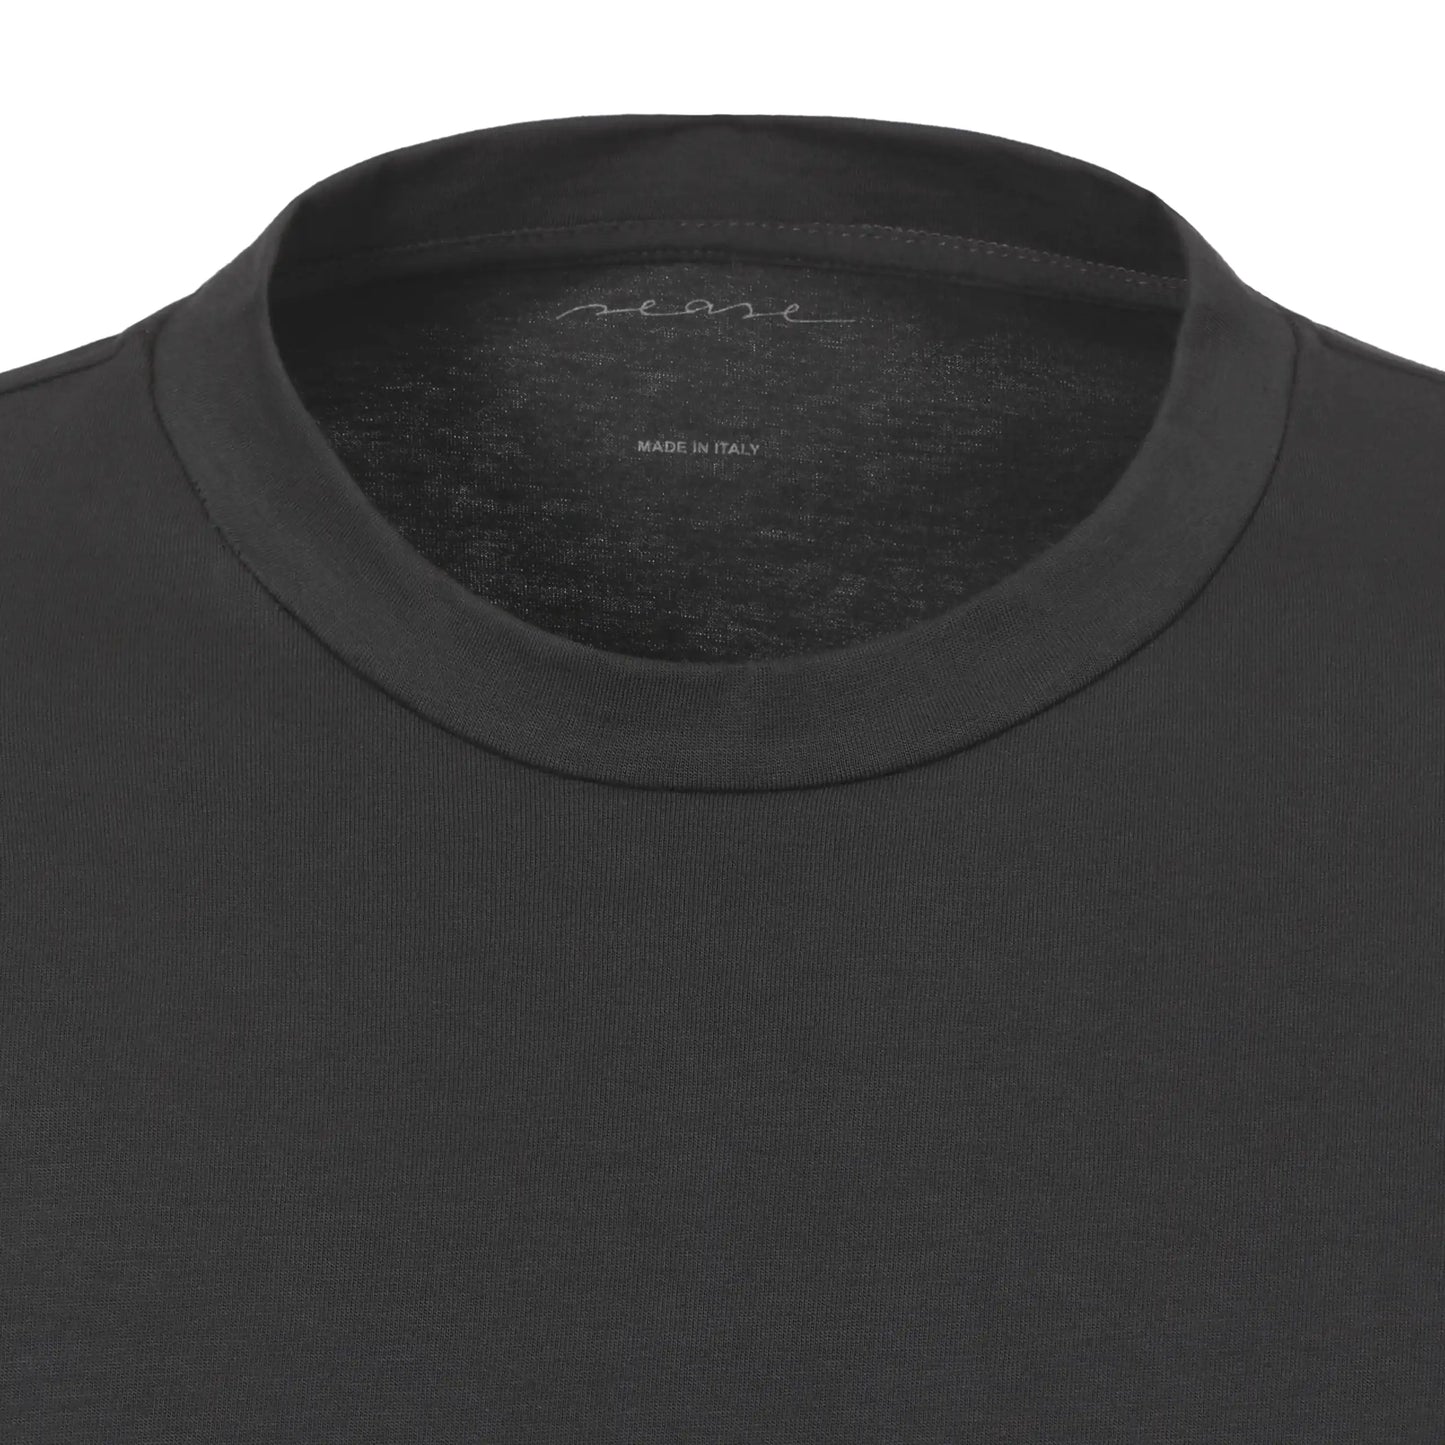 TS Titus Short Sleeve T-Shirt in Graphite